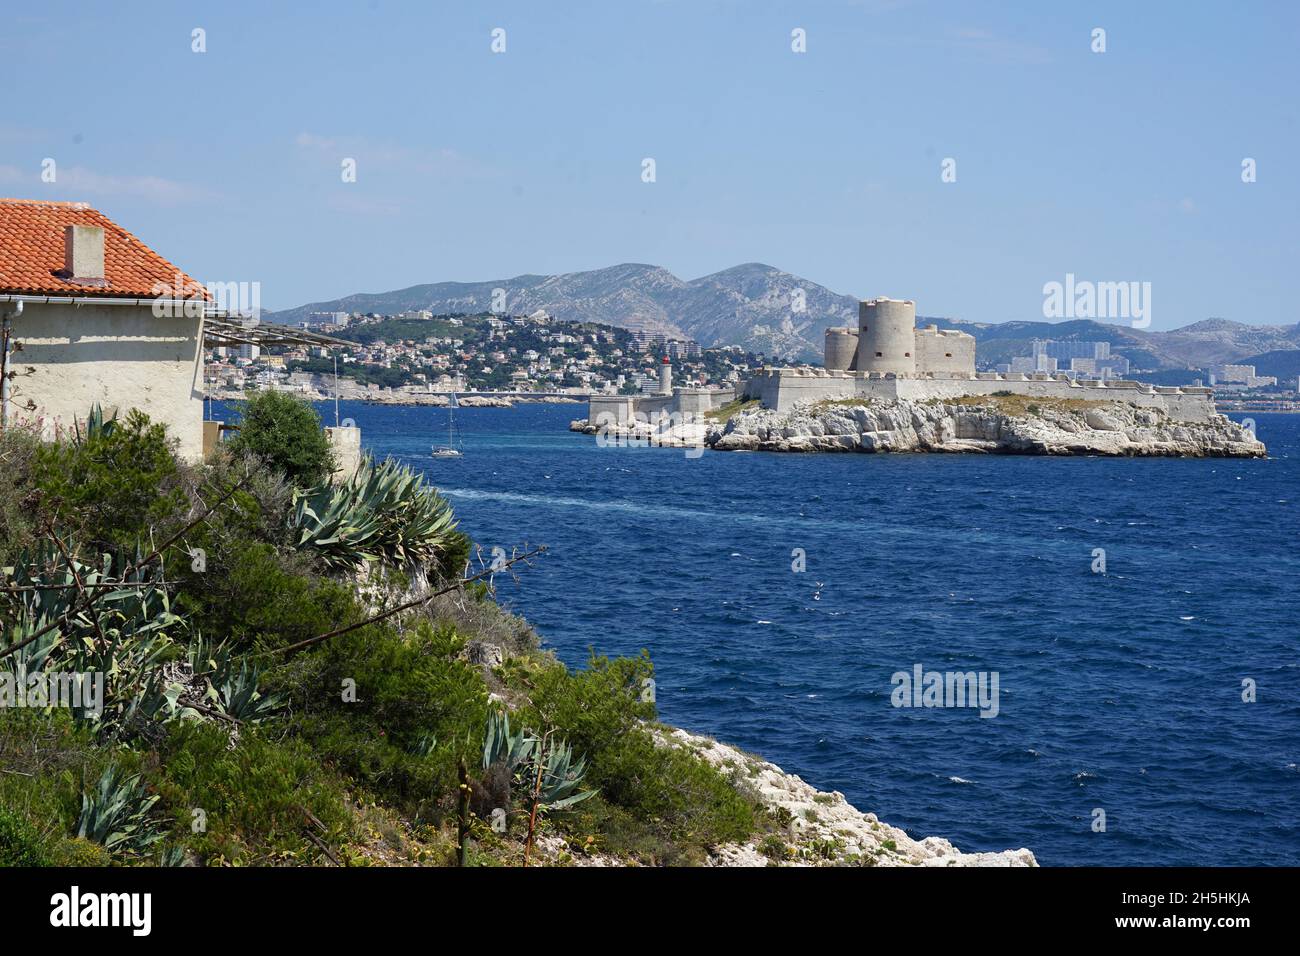 Chateau d'If, IIe d'If, seen from Ile Pomegues, Frioul Islands, Marseille, Mediterranean Sea, France Stock Photo